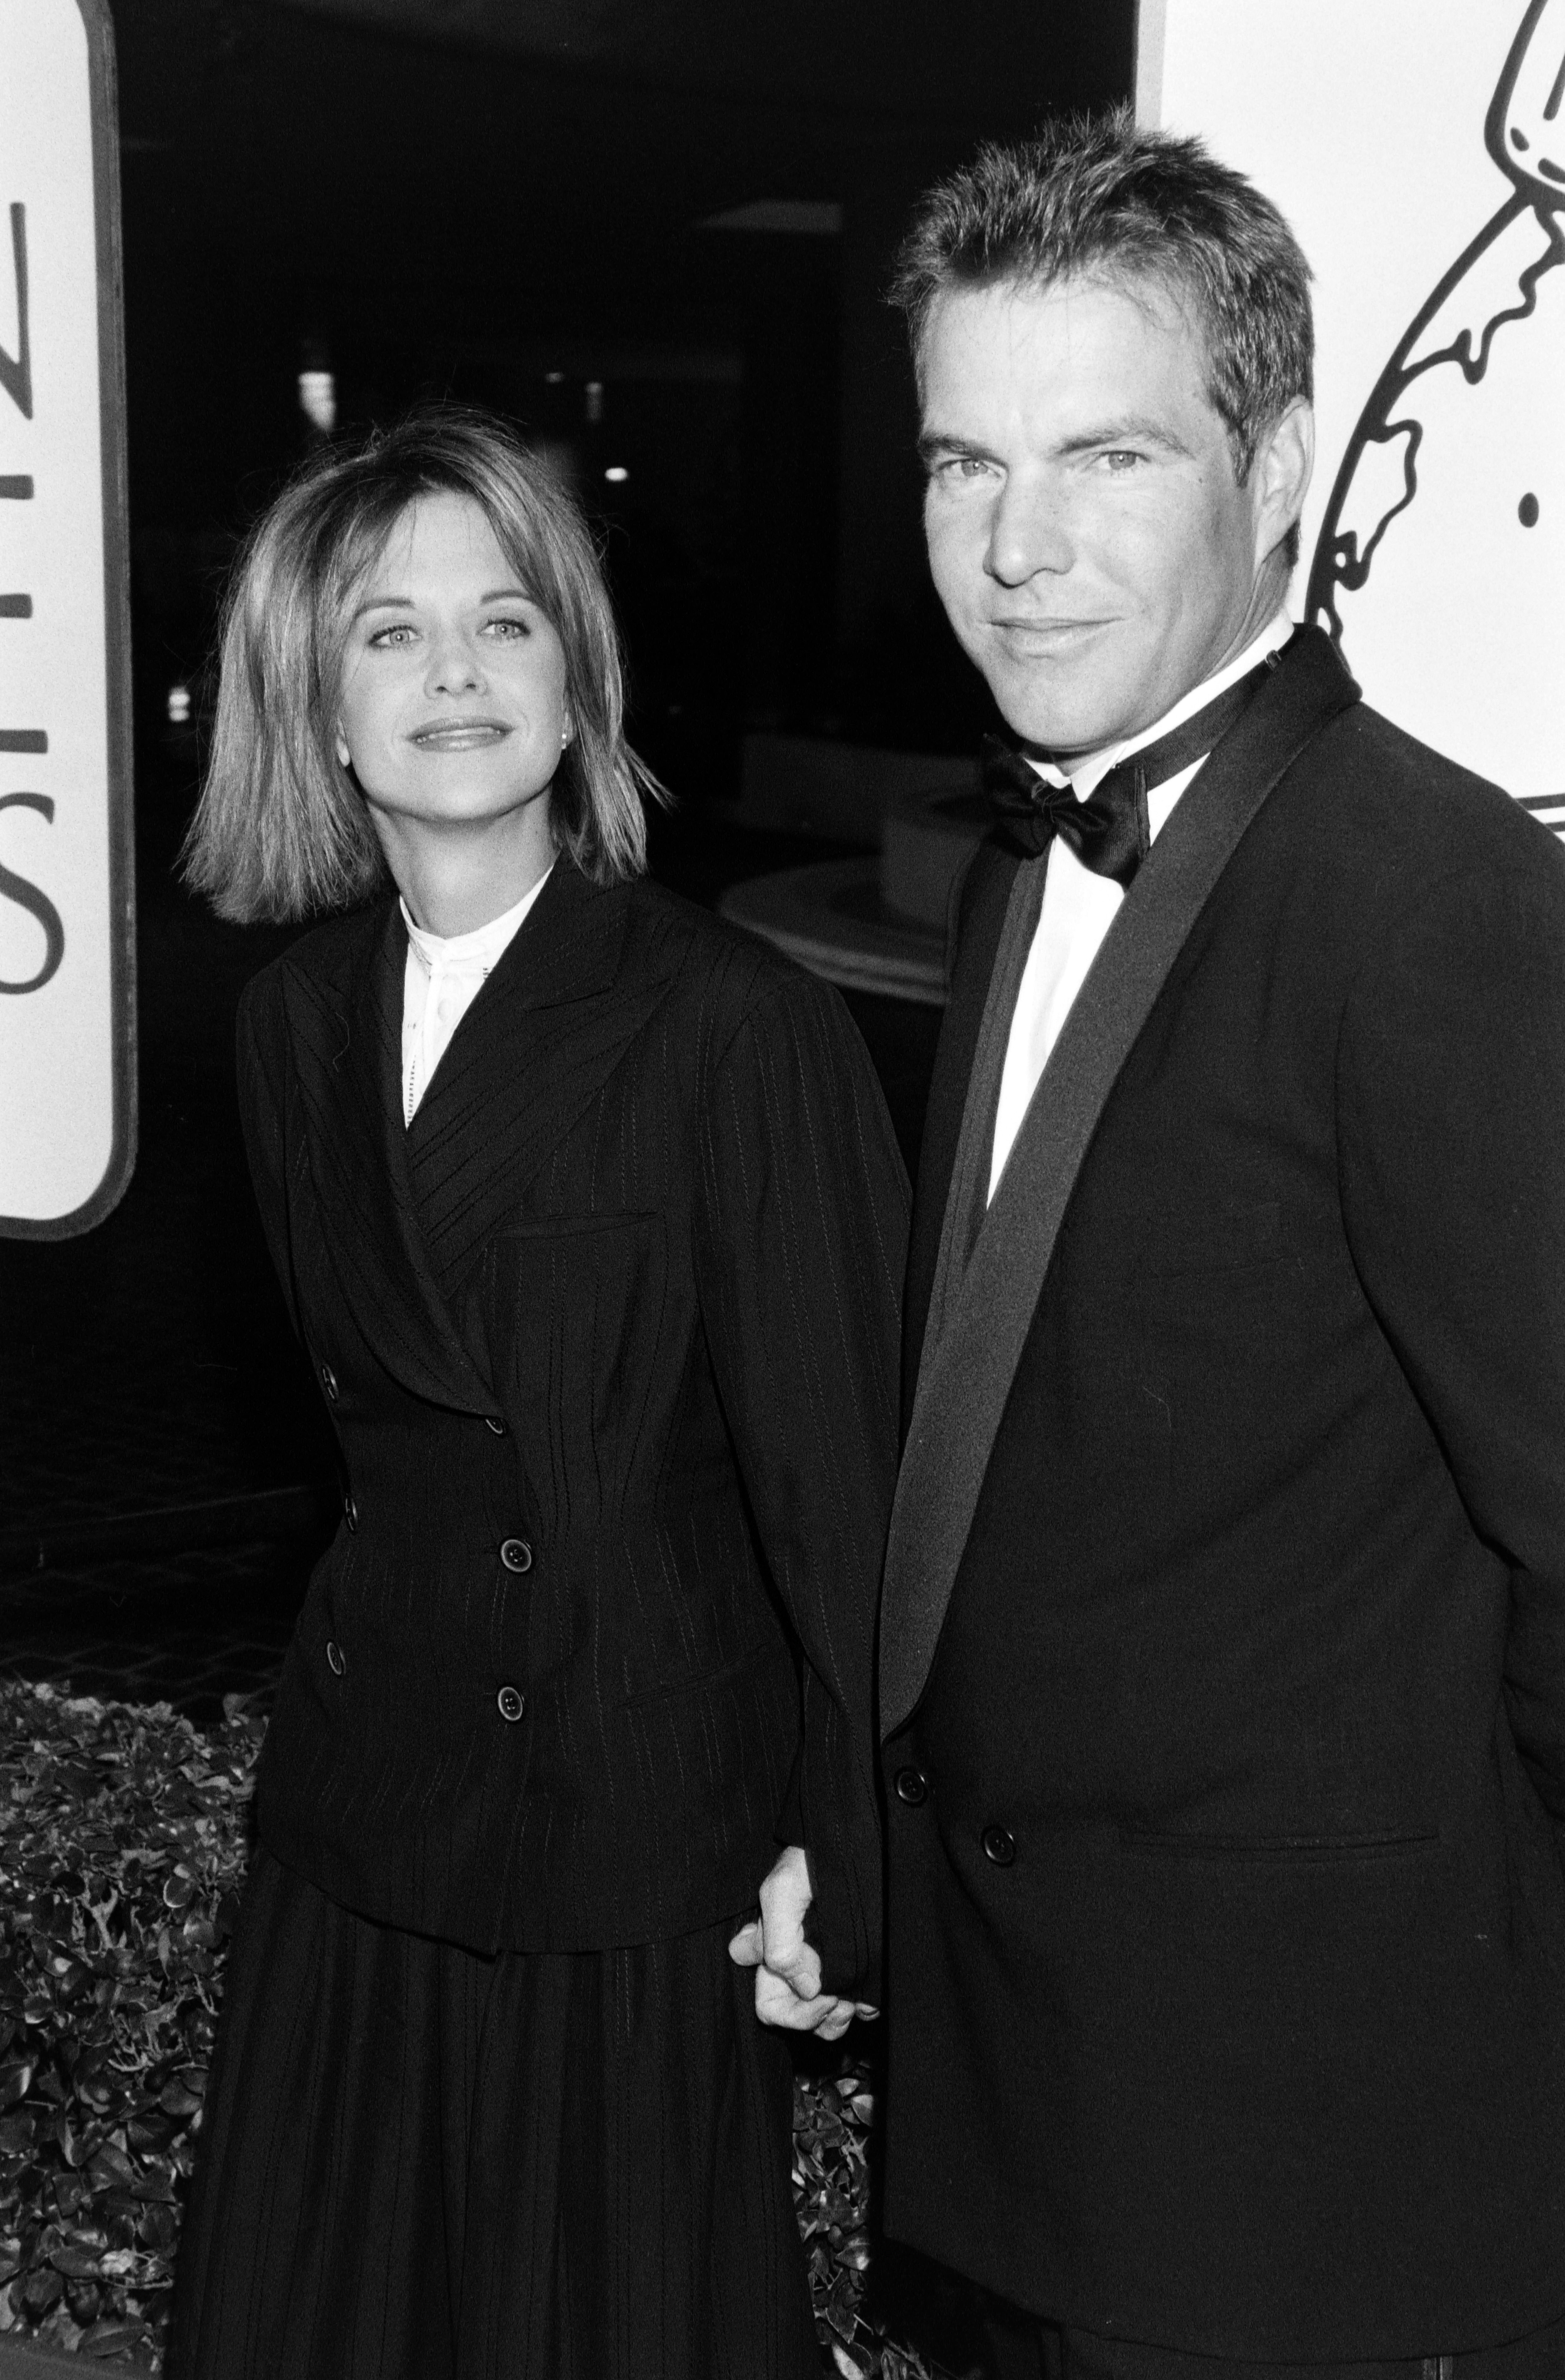 Meg Ryan and Dennis Quaid attend the 51st Annual Golden Globe Awards on January 22, 1994 in Beverly Hills, California. | Source: Getty Images